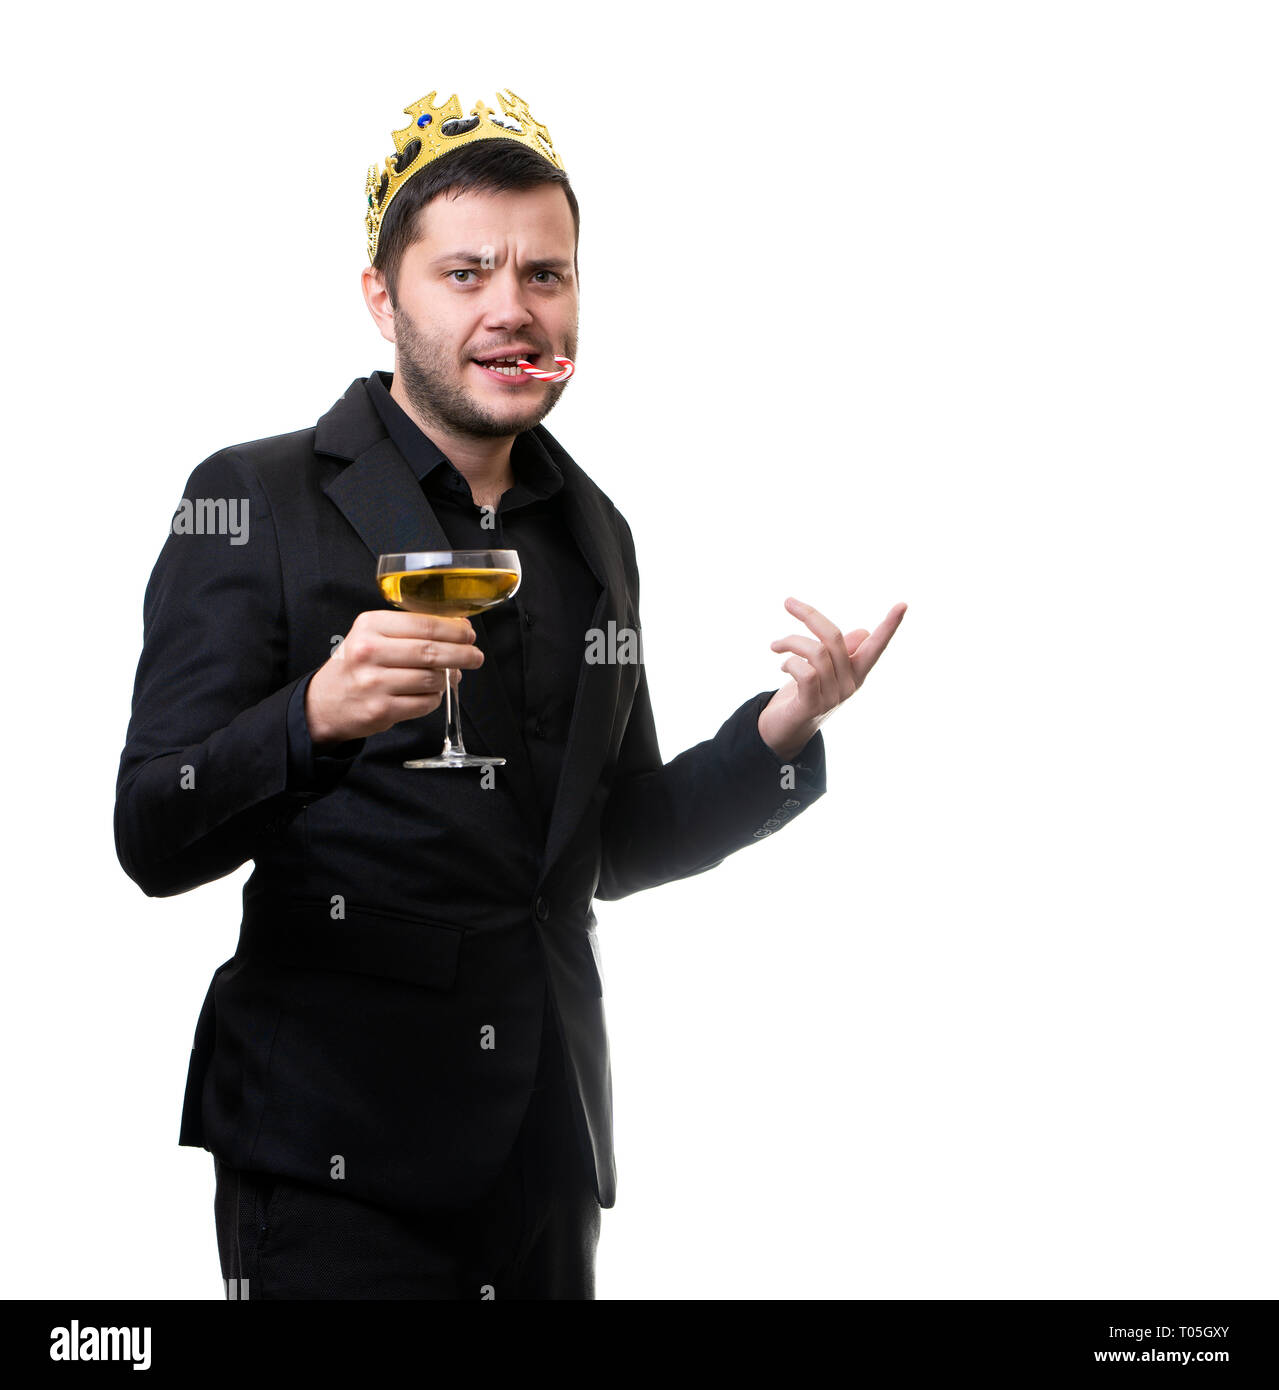 Happy brunet in crown, black suit with wine glass in hand. Stock Photo